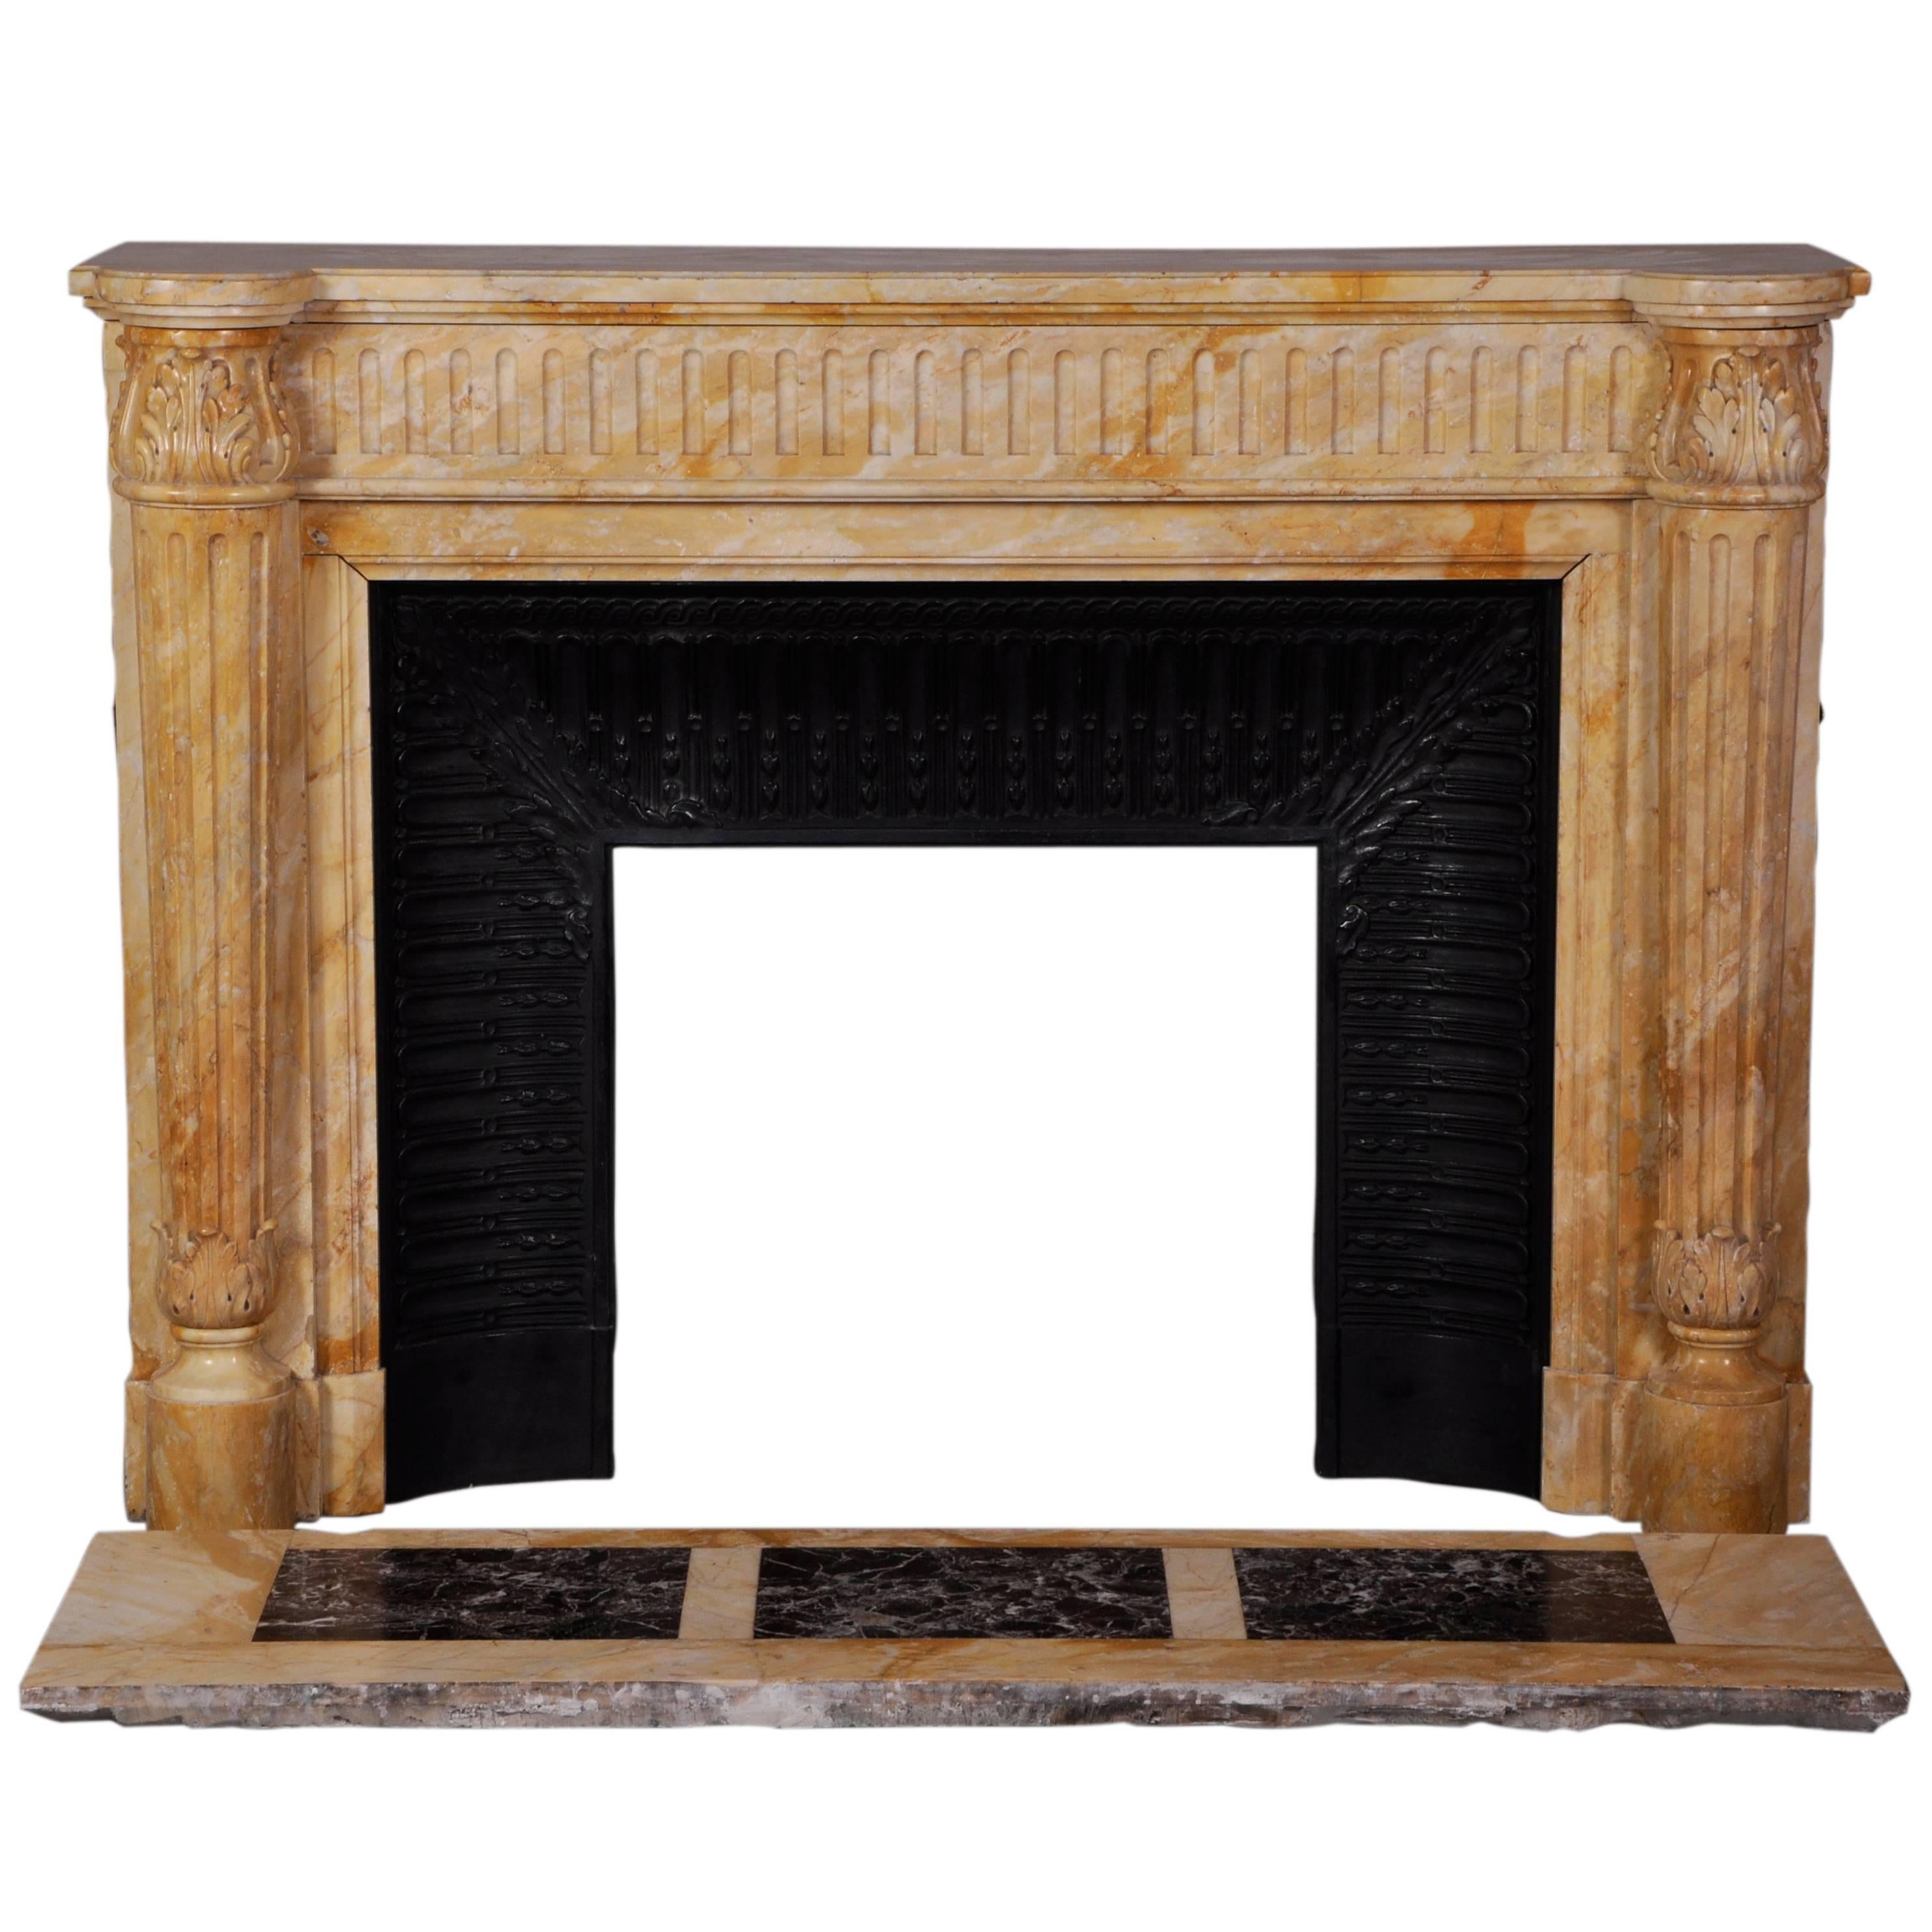 Louis XVI Style Fireplace in Yellow from Siena Marble with Half-Columns For Sale